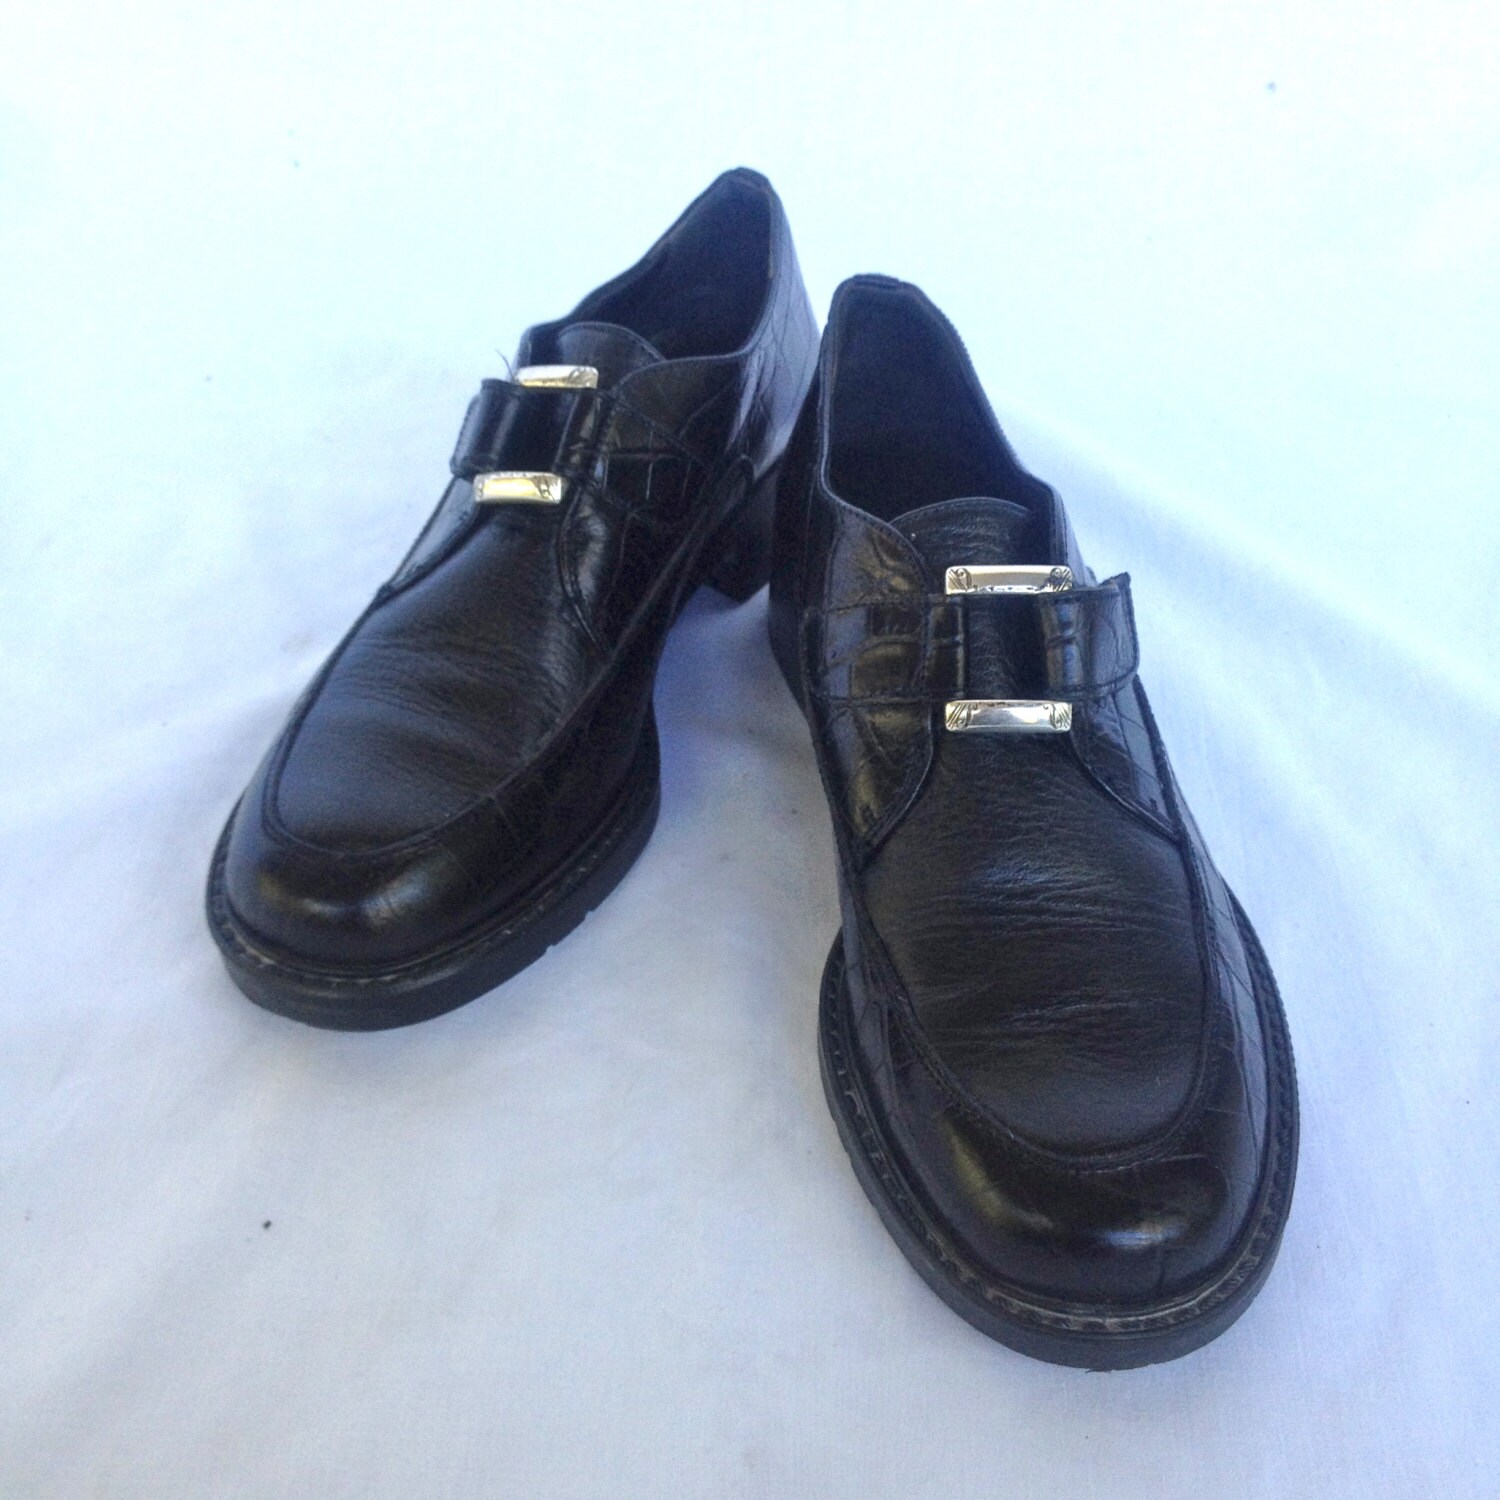 90s Women’s Brighton Black Leather Loafers with side velcro buckle size ...